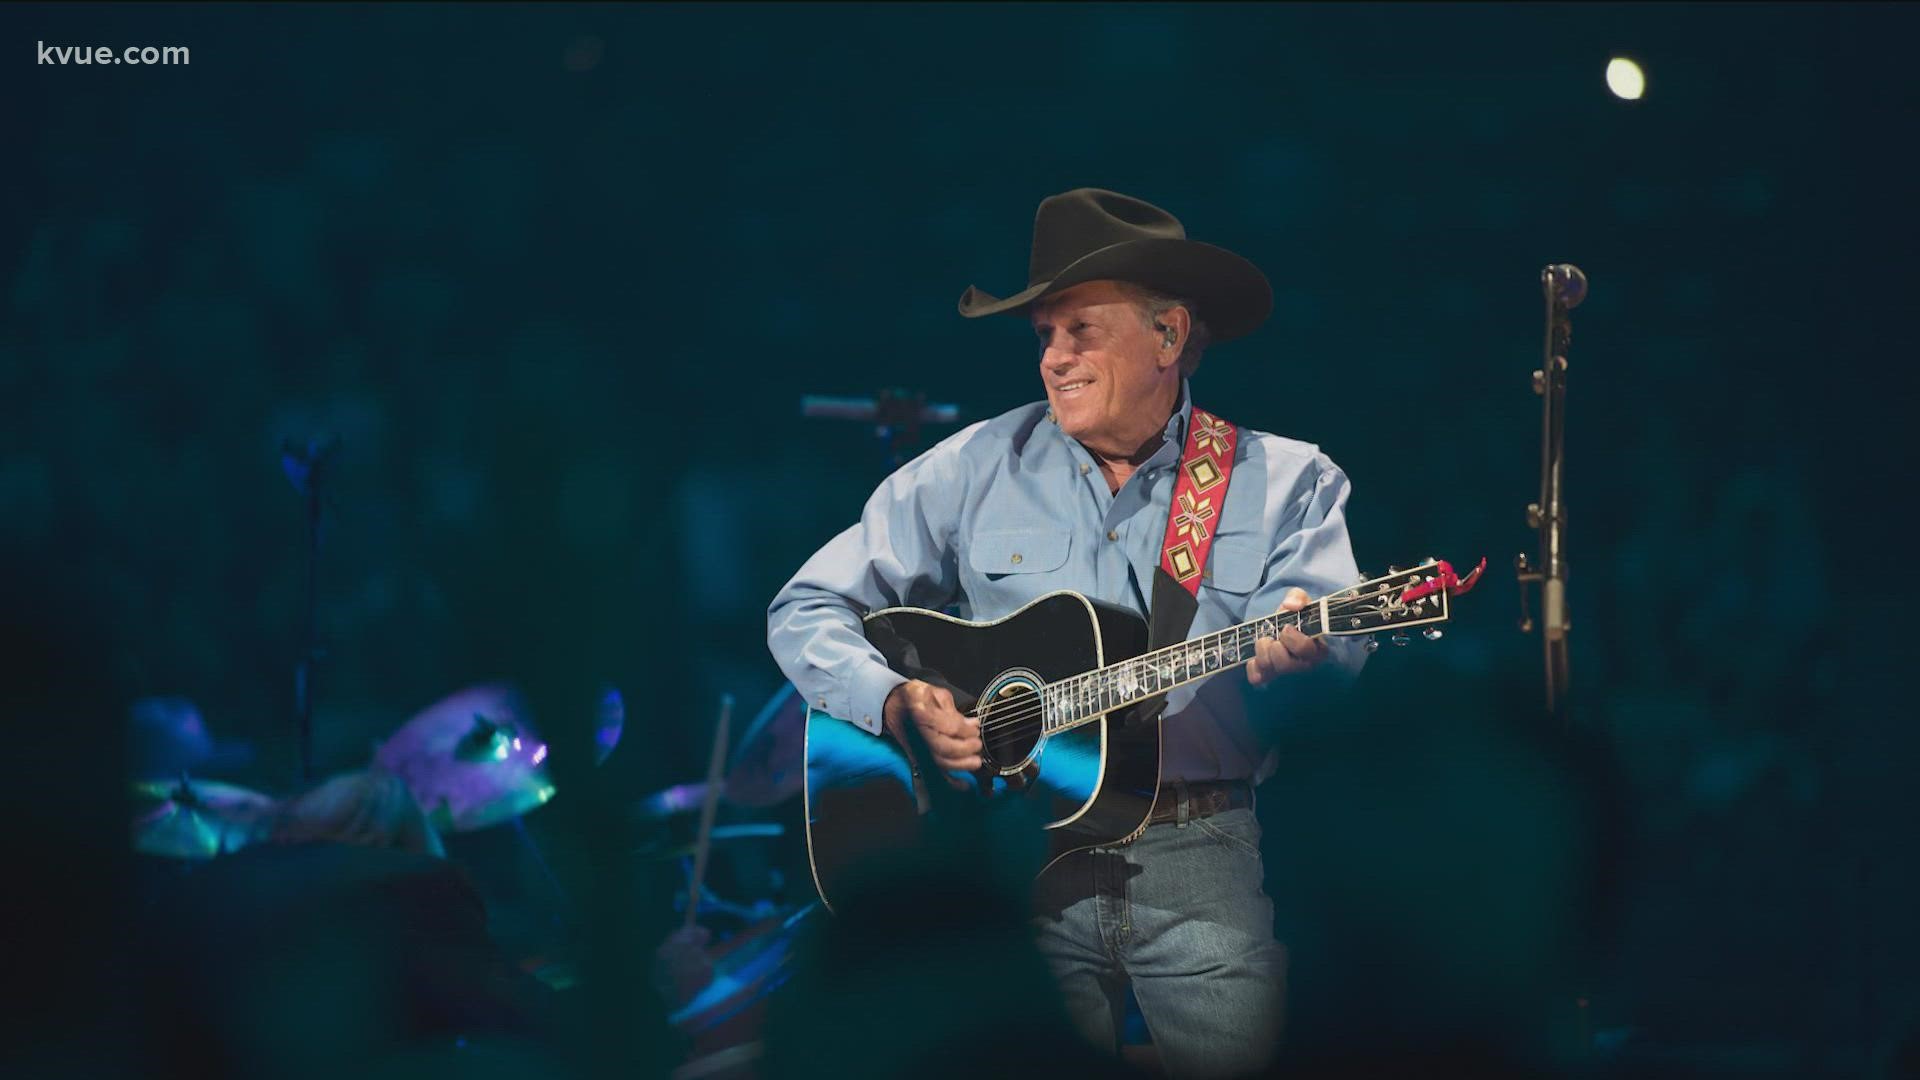 Strait will be joined by special guests Willie Nelson and the Randy Rogers Band. The show will take place on Nelson's 89th birthday, April 29.